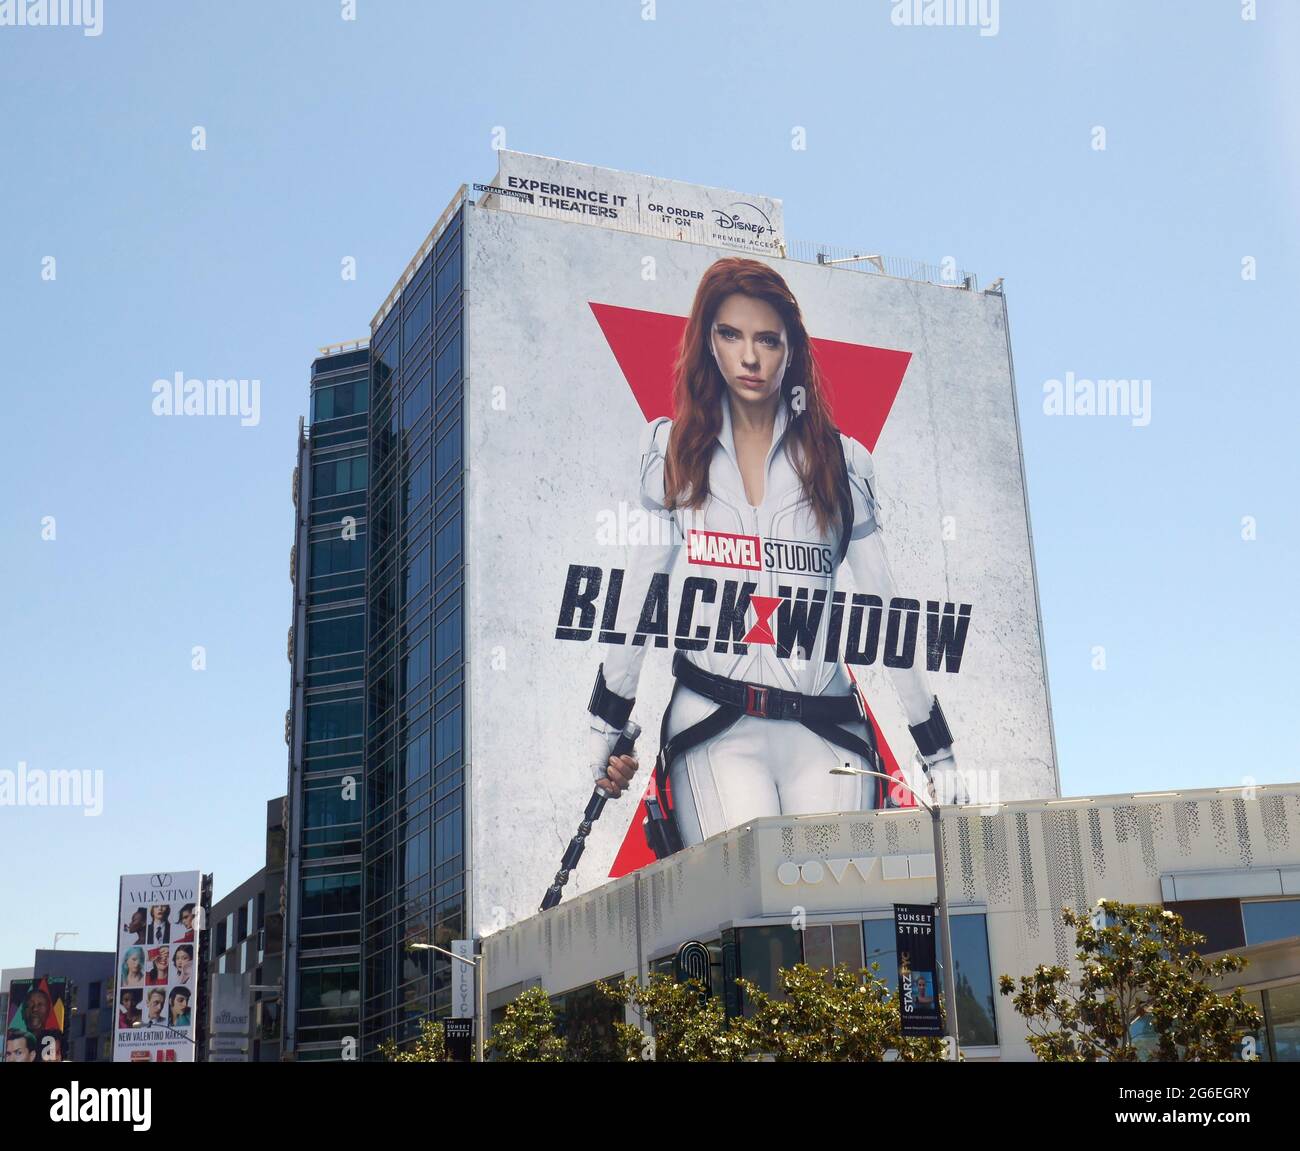 Los Angeles, California, USA 2nd July 2021 A general view of atmosphere of Disney Marvel Studios 'Black Widow' Scarlett Johansson Billboard during Coronavirus Covid-19 pandemic on July 2, 2021 in Los Angeles, California, USA. Photo by Barry King/Alamy Stock Photo Stock Photo